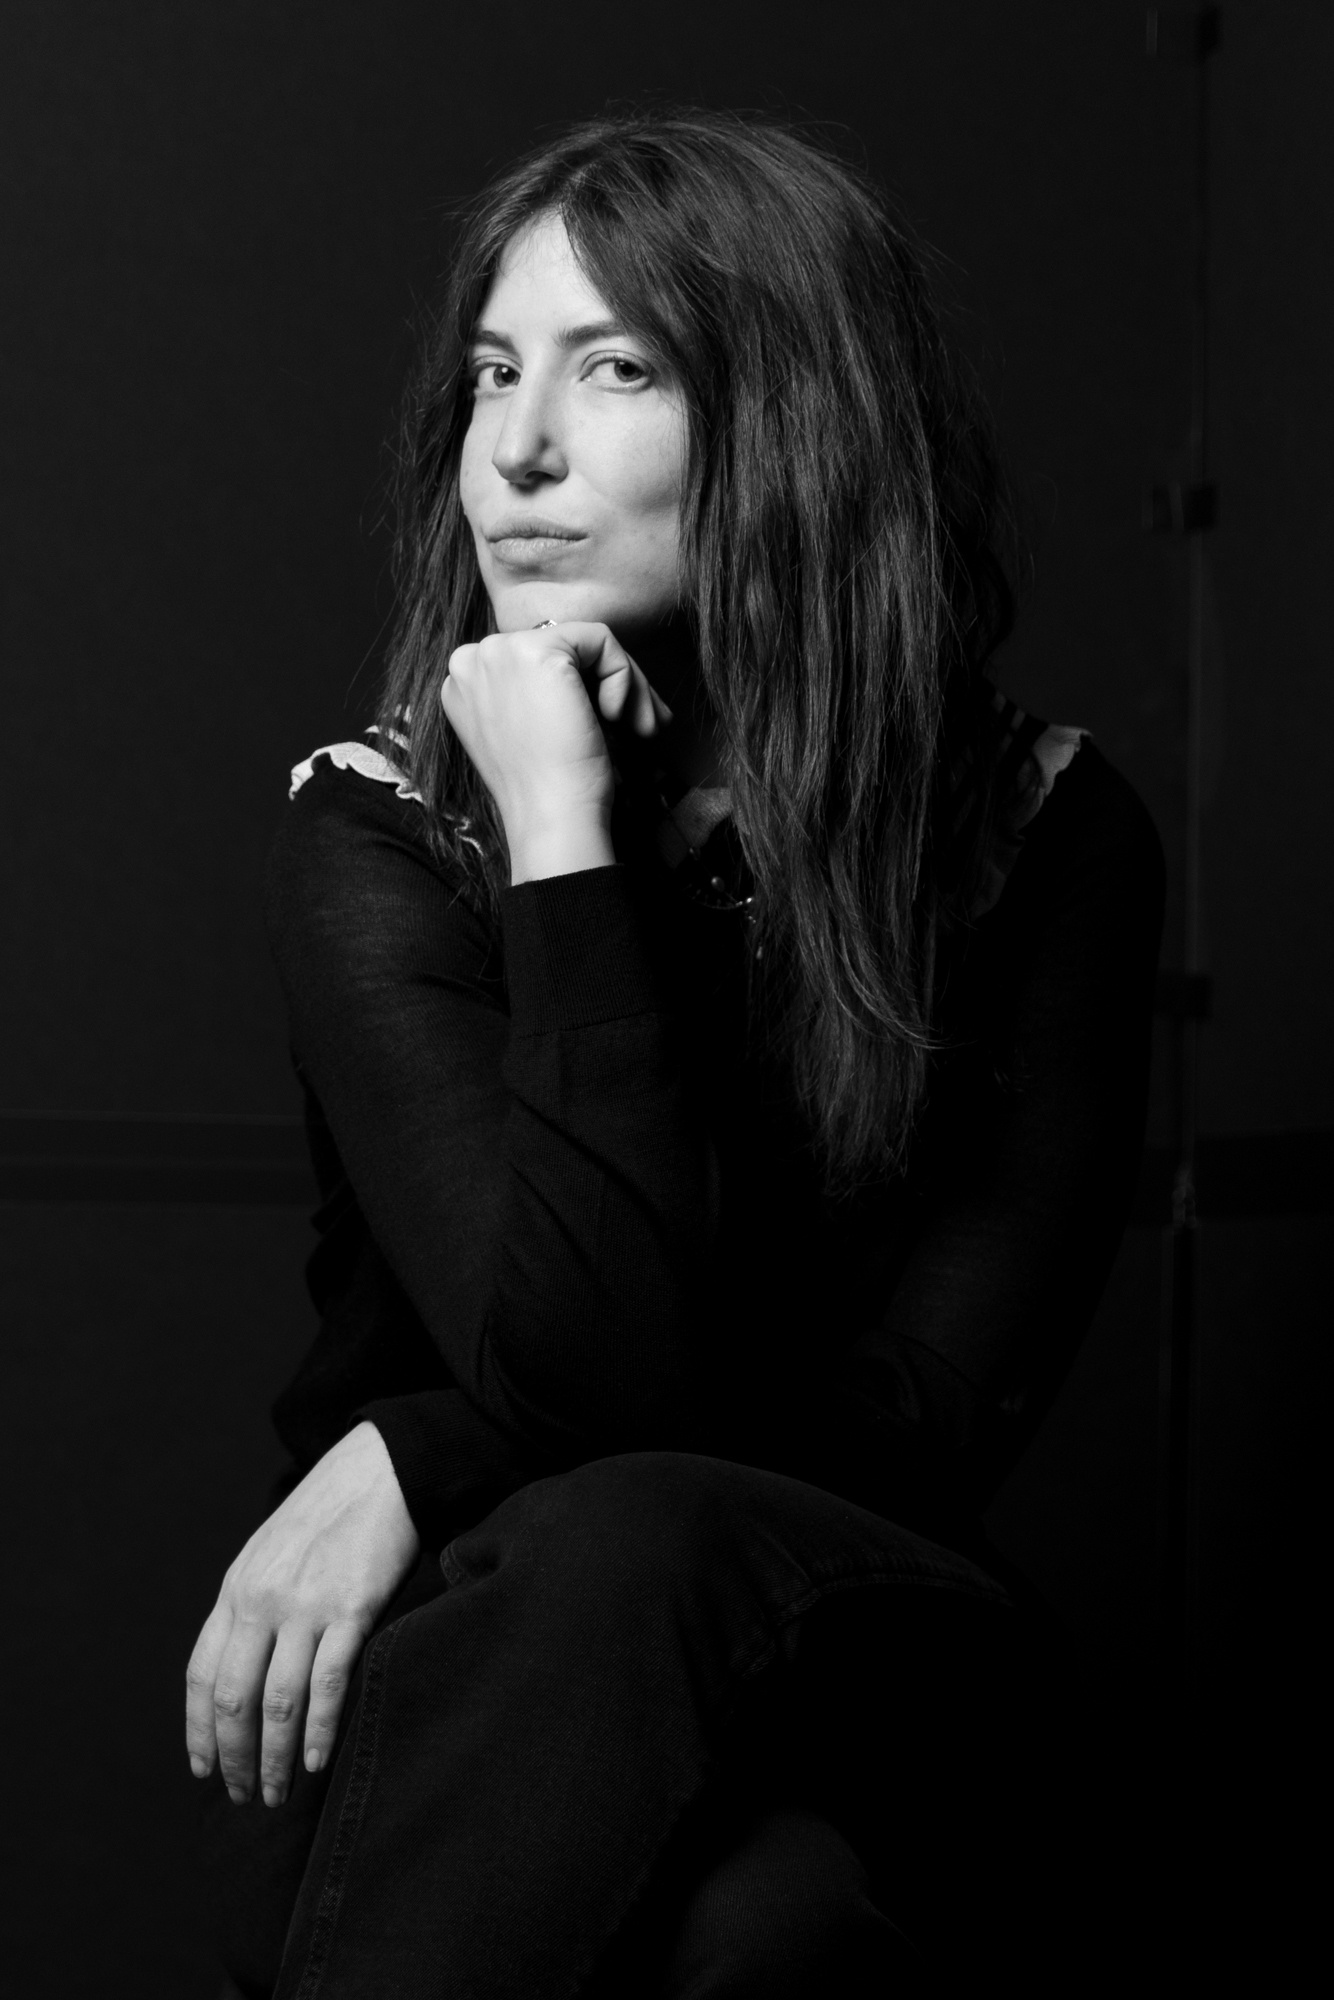 A black and white portrait of Alexandra Rosenberg, who poses with one hand brought to her chin to support her head. She has long dark hair and wears dark clothing that blends in with the dark background. Photo by Maria Baranova